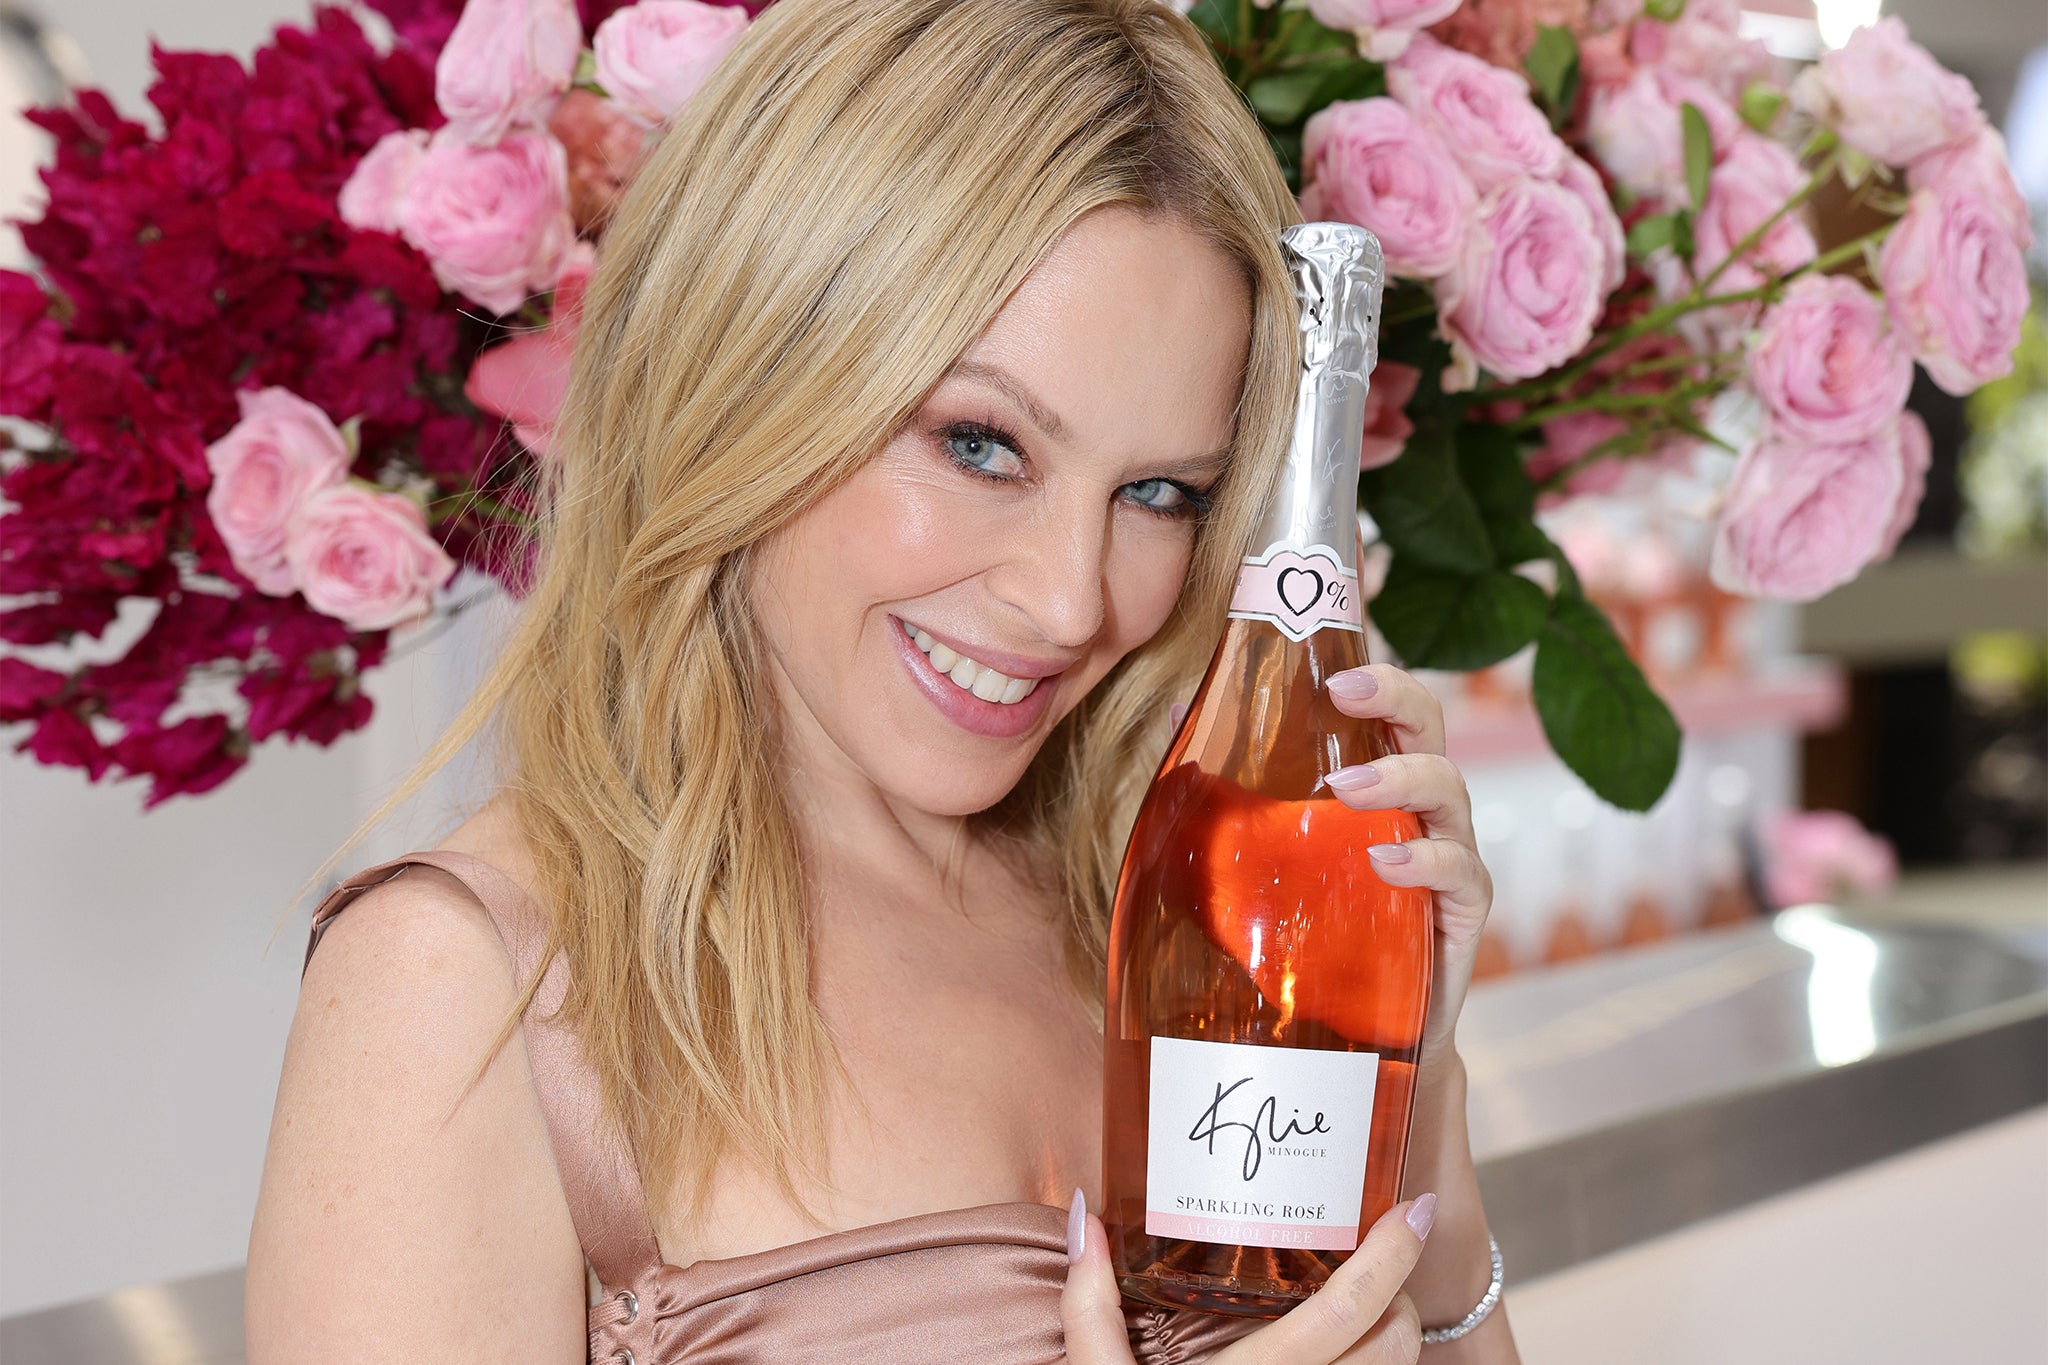 Since its launch in 2020, Kylie Minogue has sold more than 10 million bottles of her wine